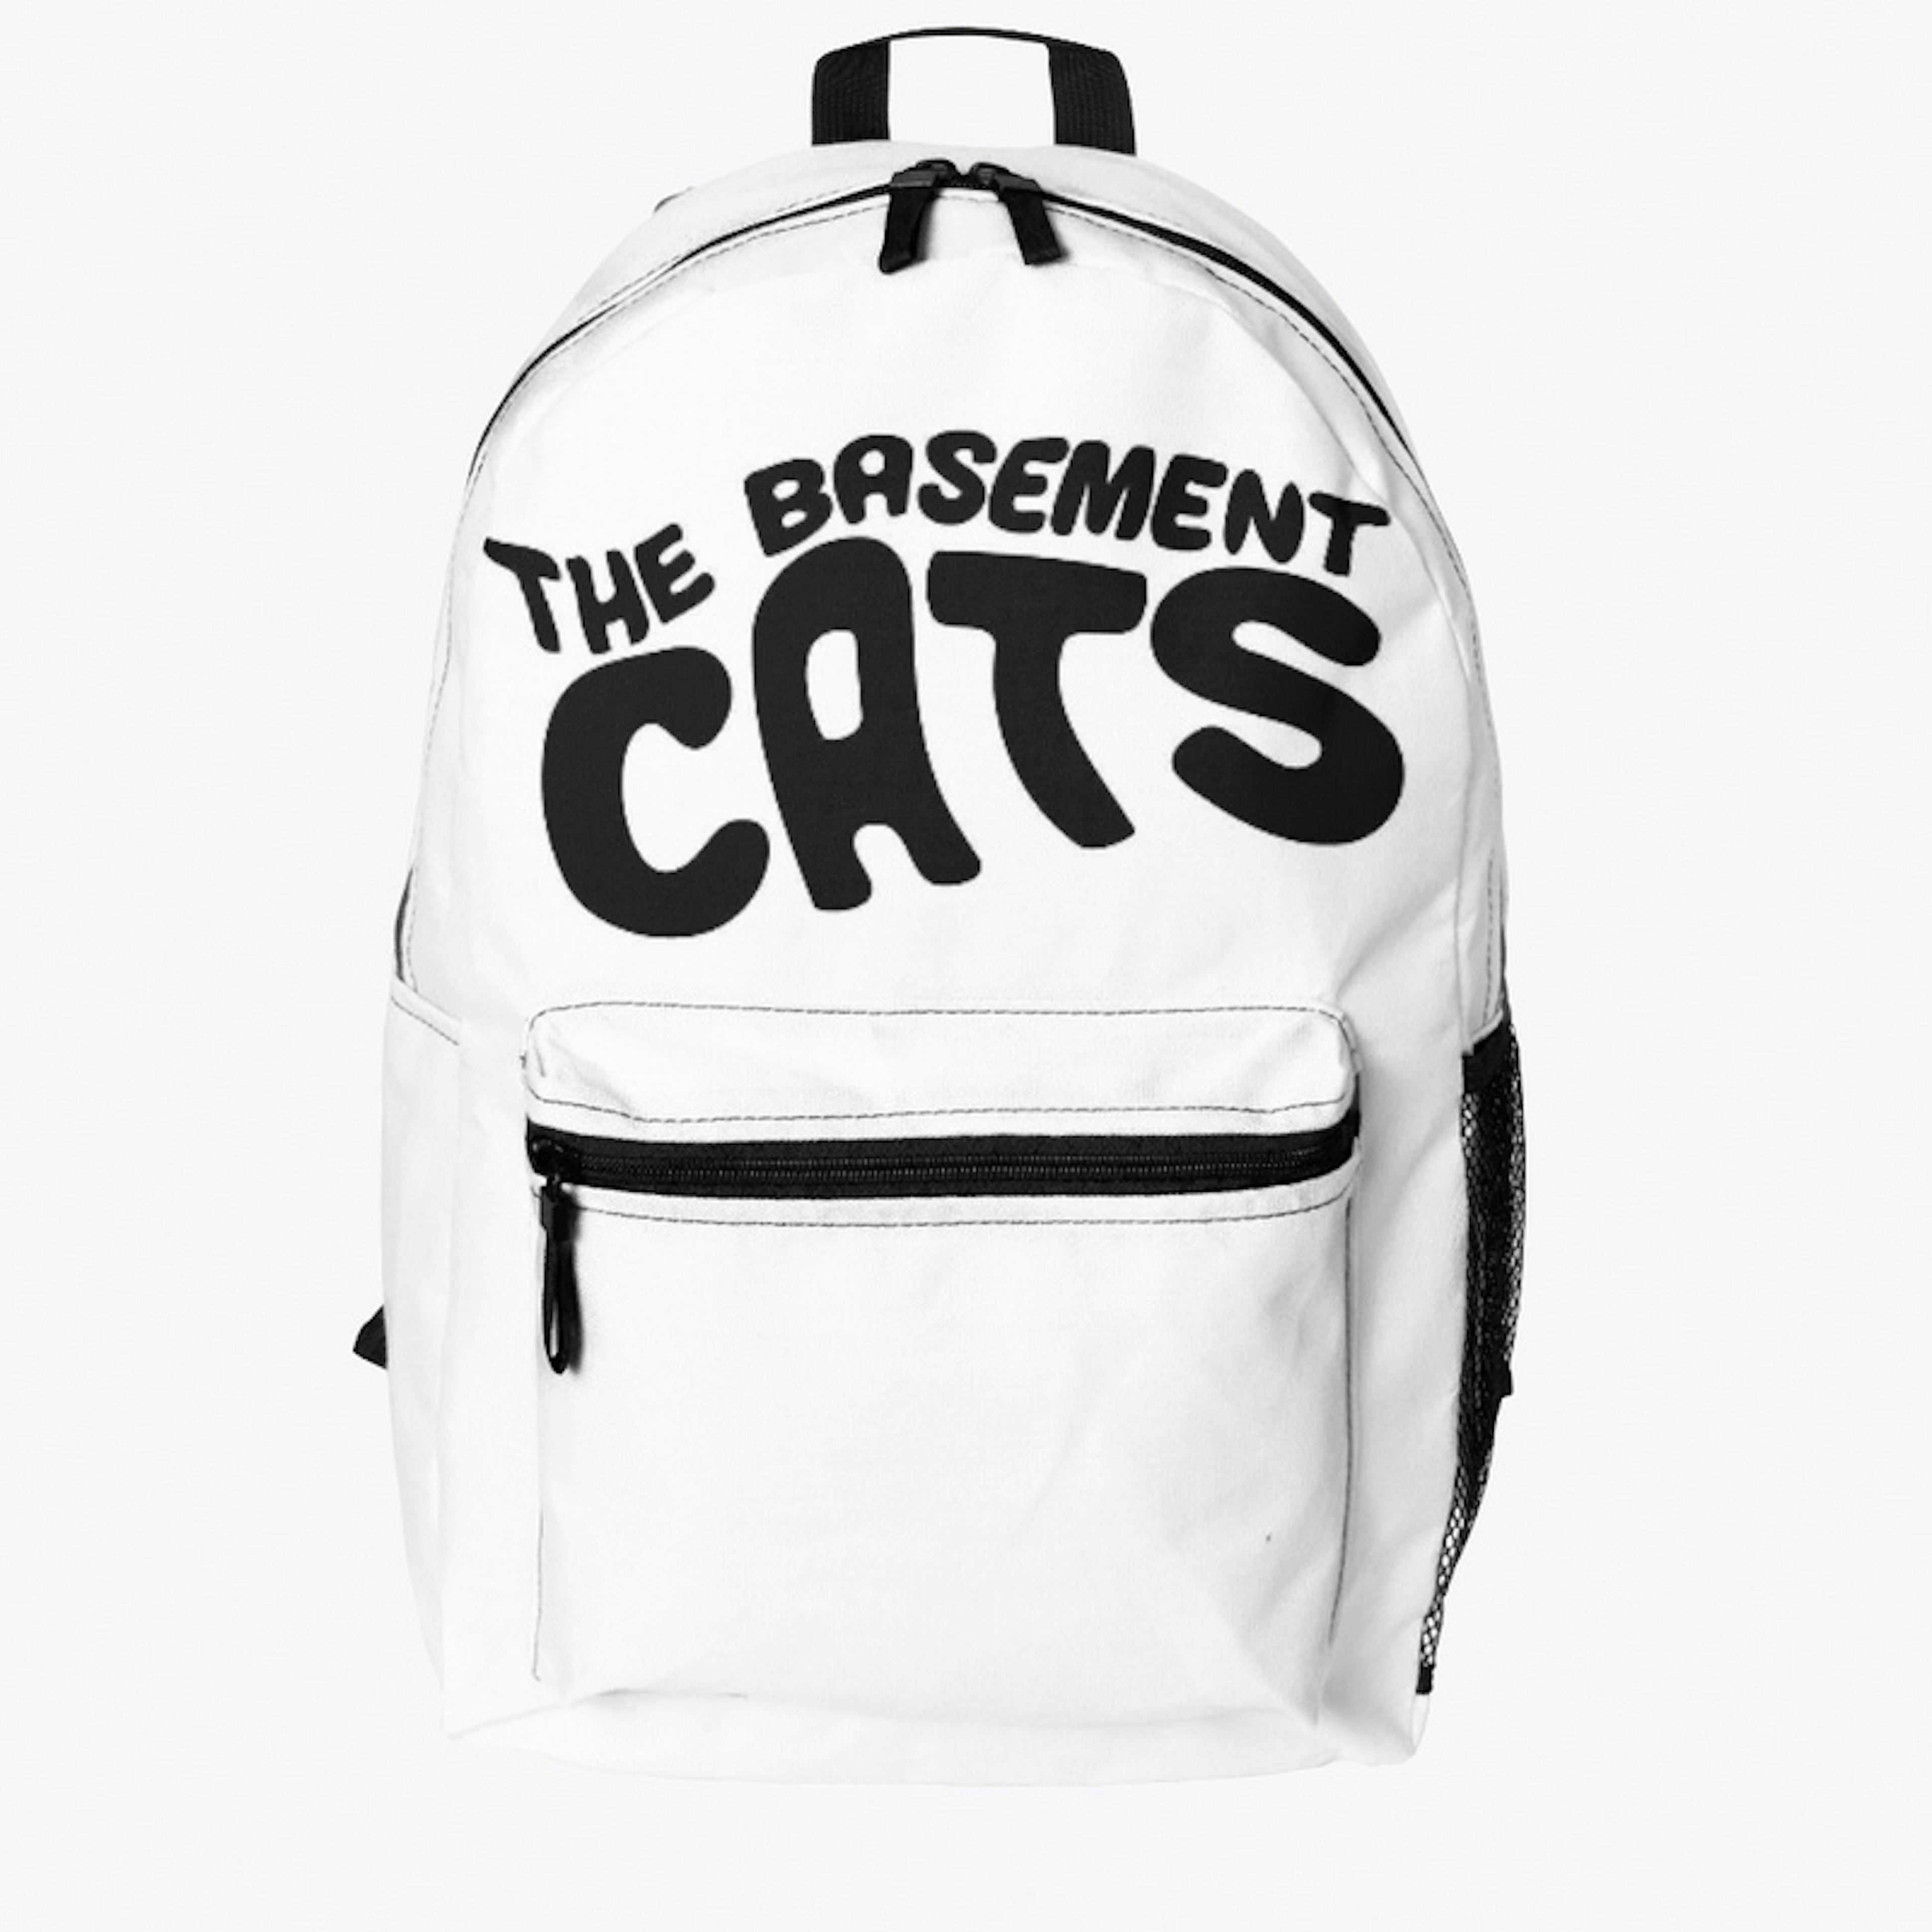 'The Basement Cats' Backpack